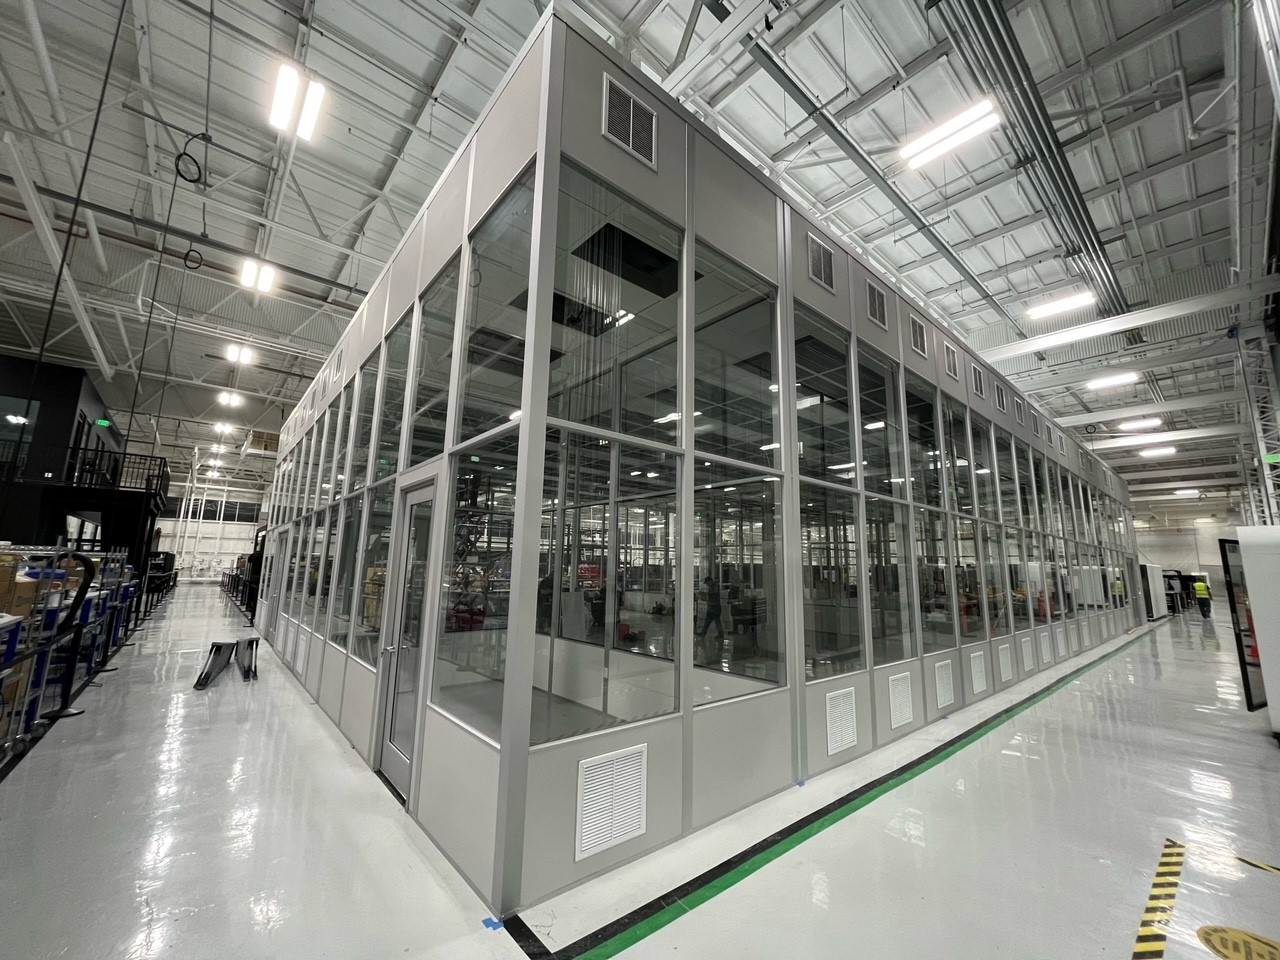 A modular factory structure with glass walls and a metal frame, located inside a large, well-lit industrial facility.